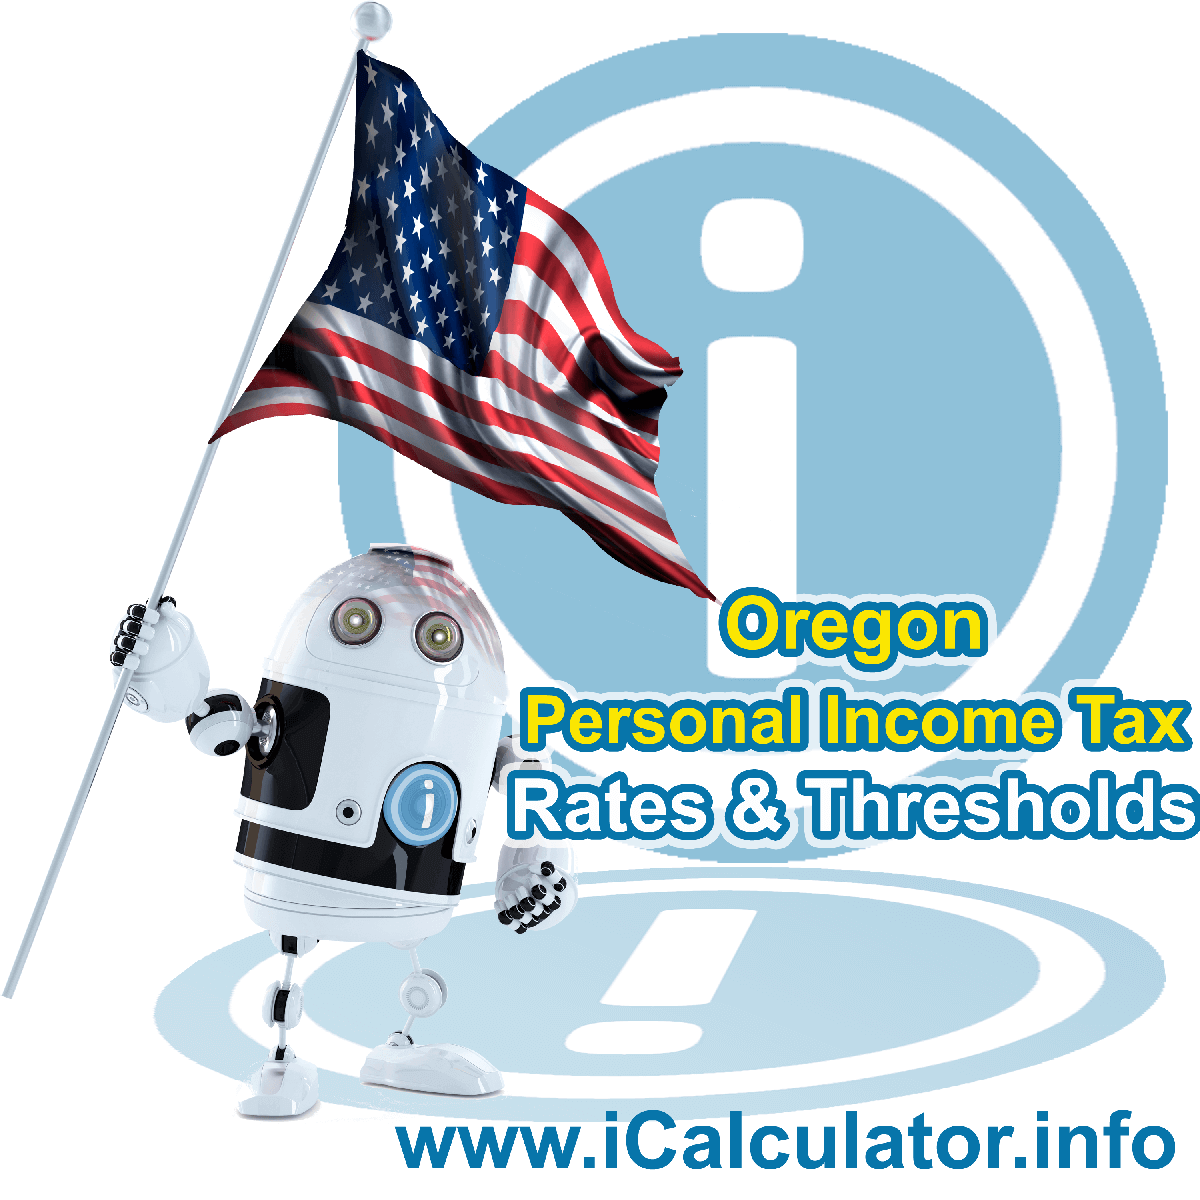 Oregon State Tax Tables 2016. This image displays details of the Oregon State Tax Tables for the 2016 tax return year which is provided in support of the 2016 US Tax Calculator